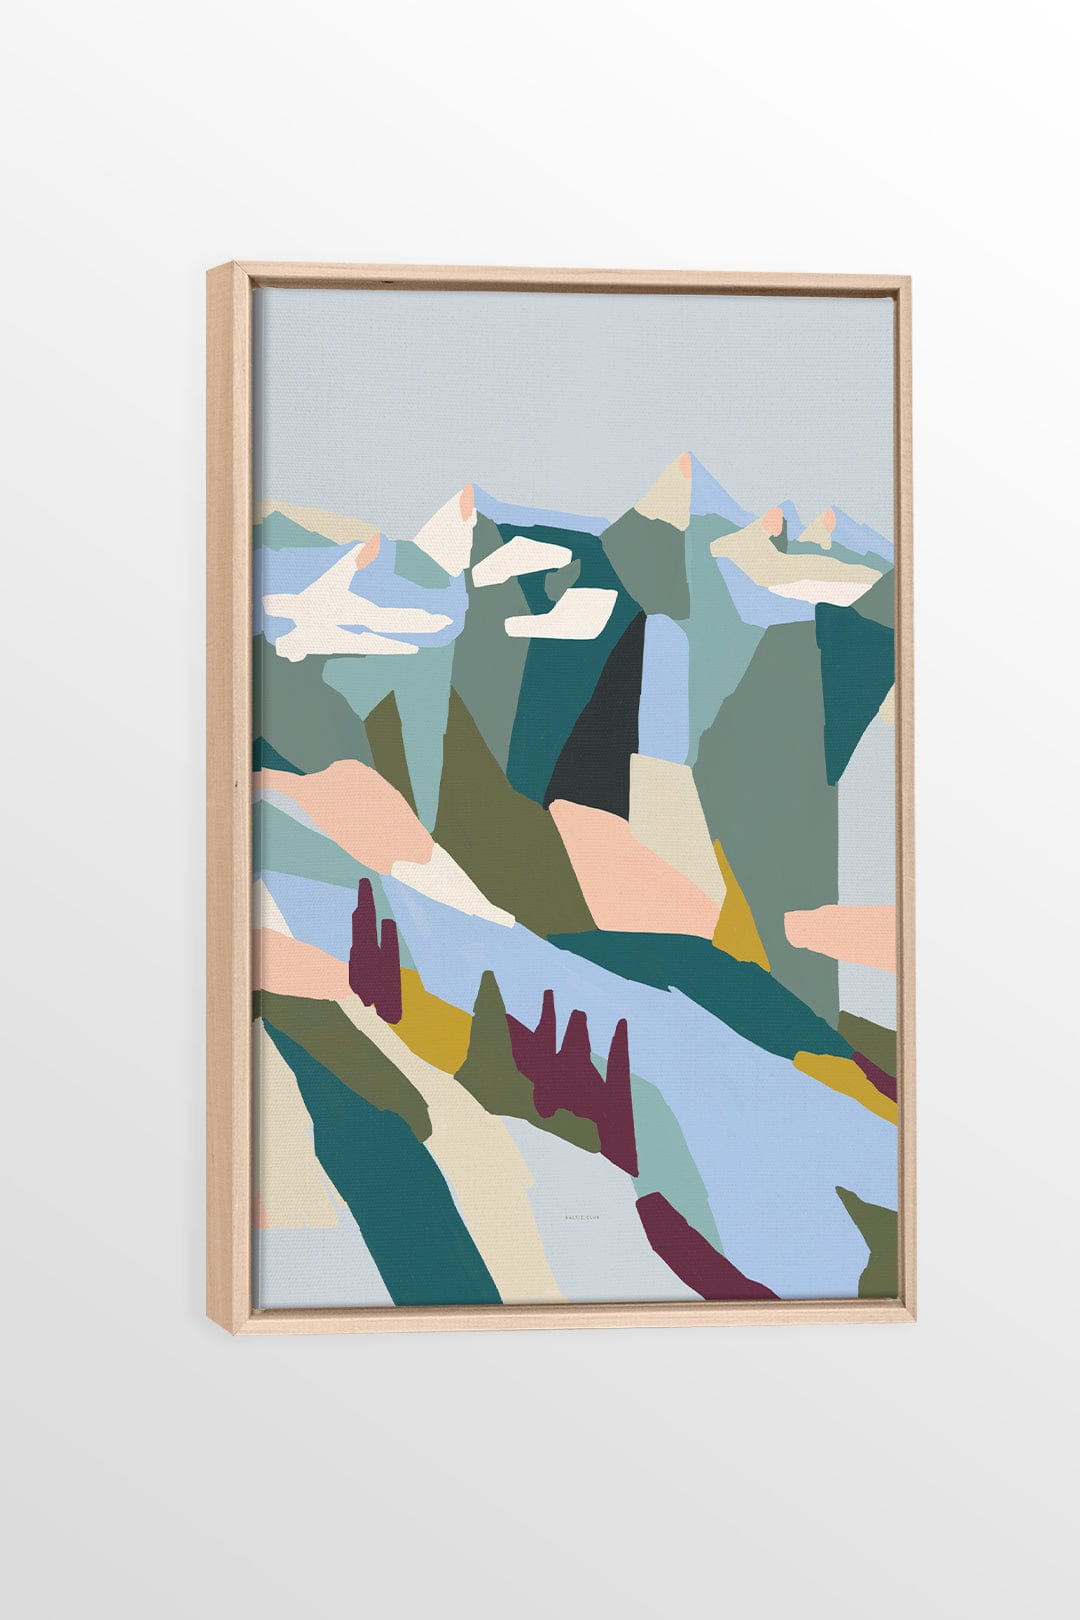 Pacific Slopes Art Print - Printed illustration on canvas